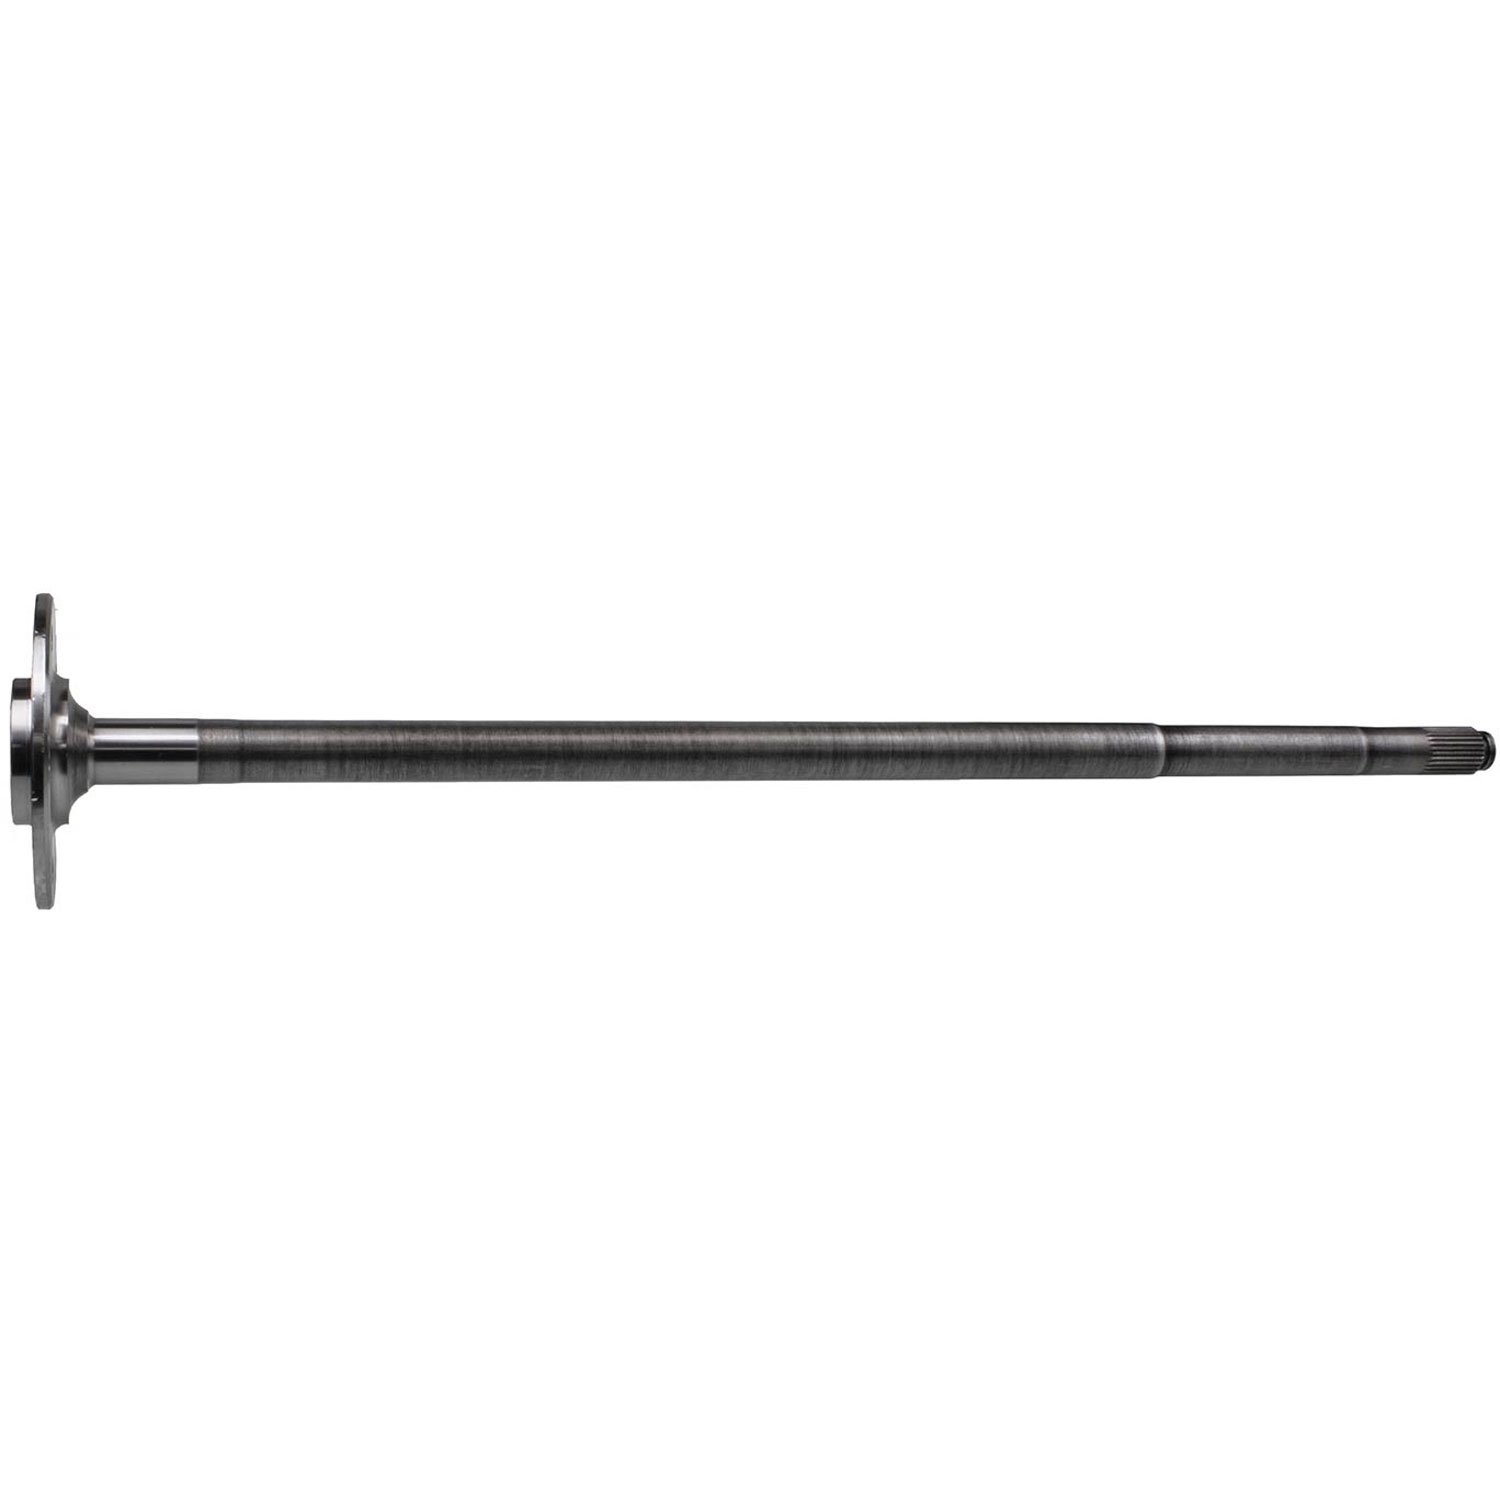 Axle Shaft 34 13/16 in. Overall Length 5